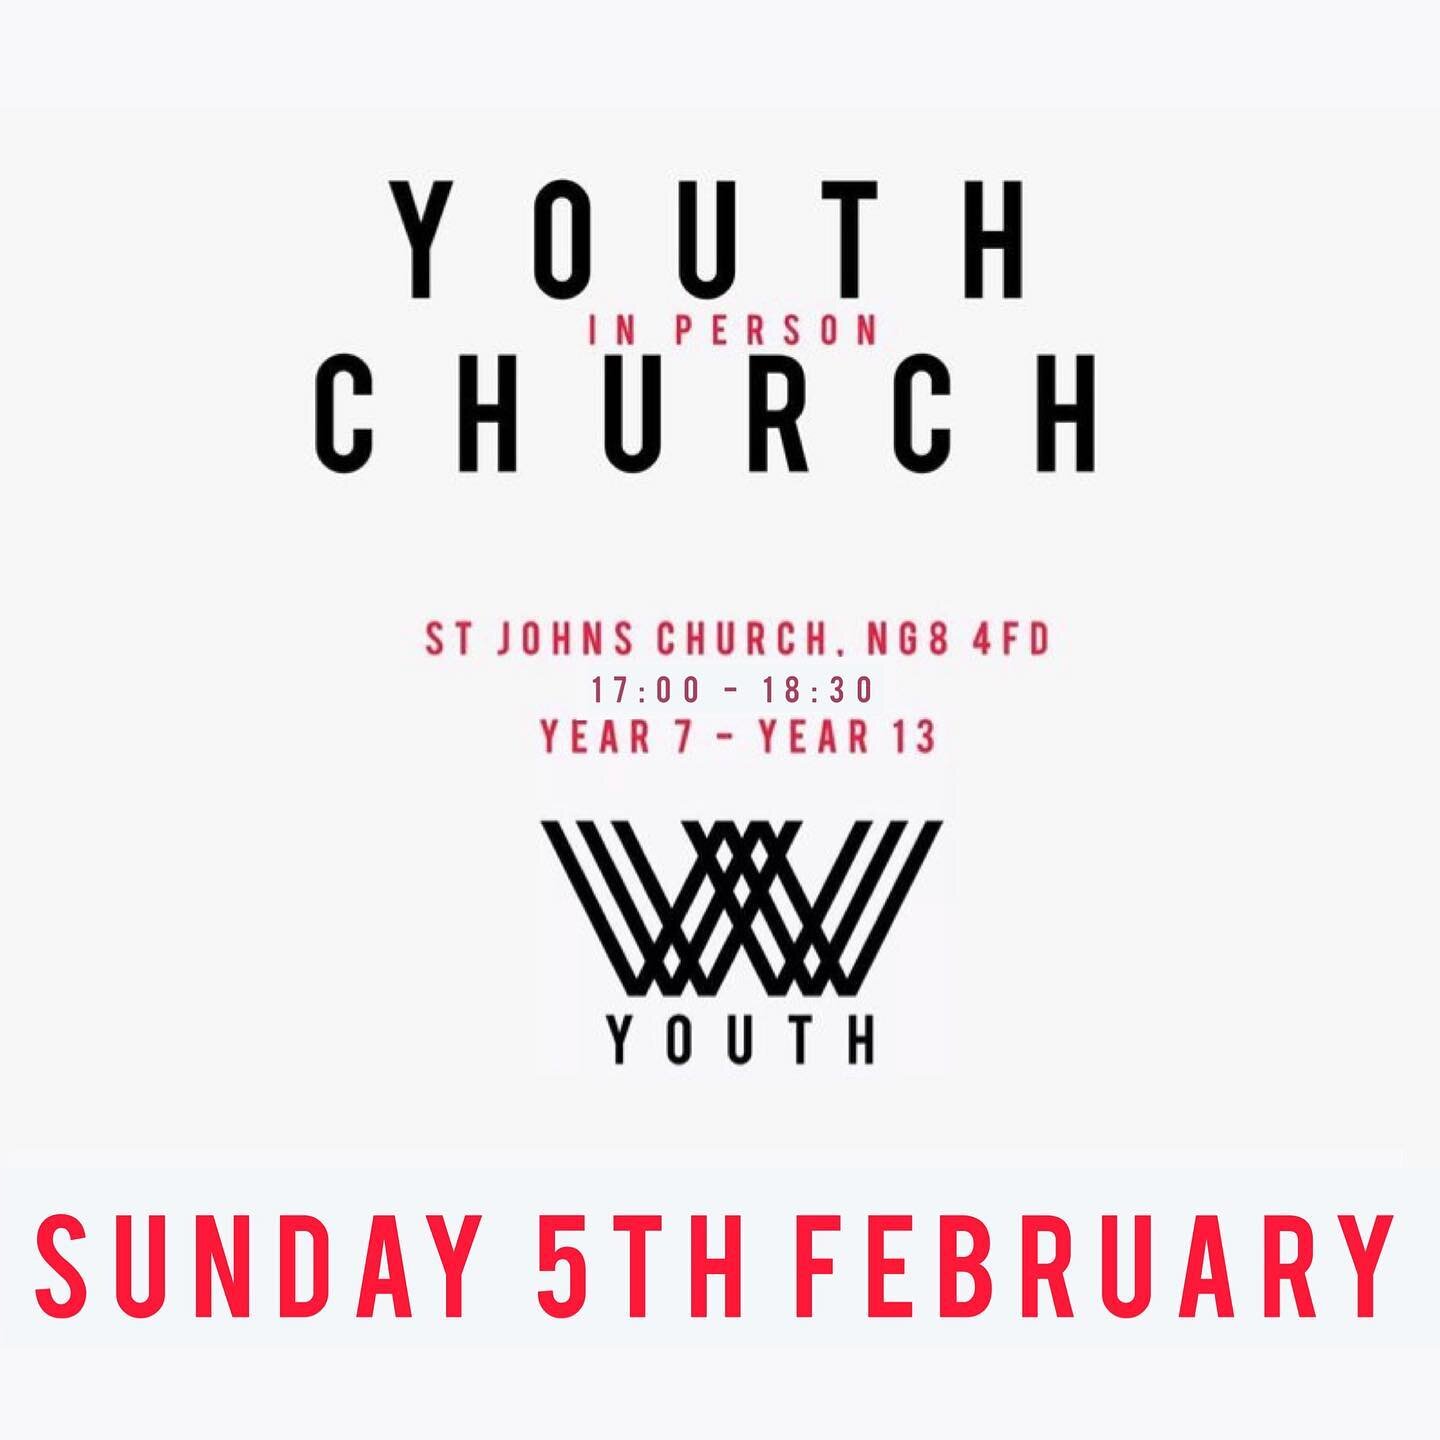 Back at St Johns for Youth church on the 5th! Mini bus will be out doing pick ups!